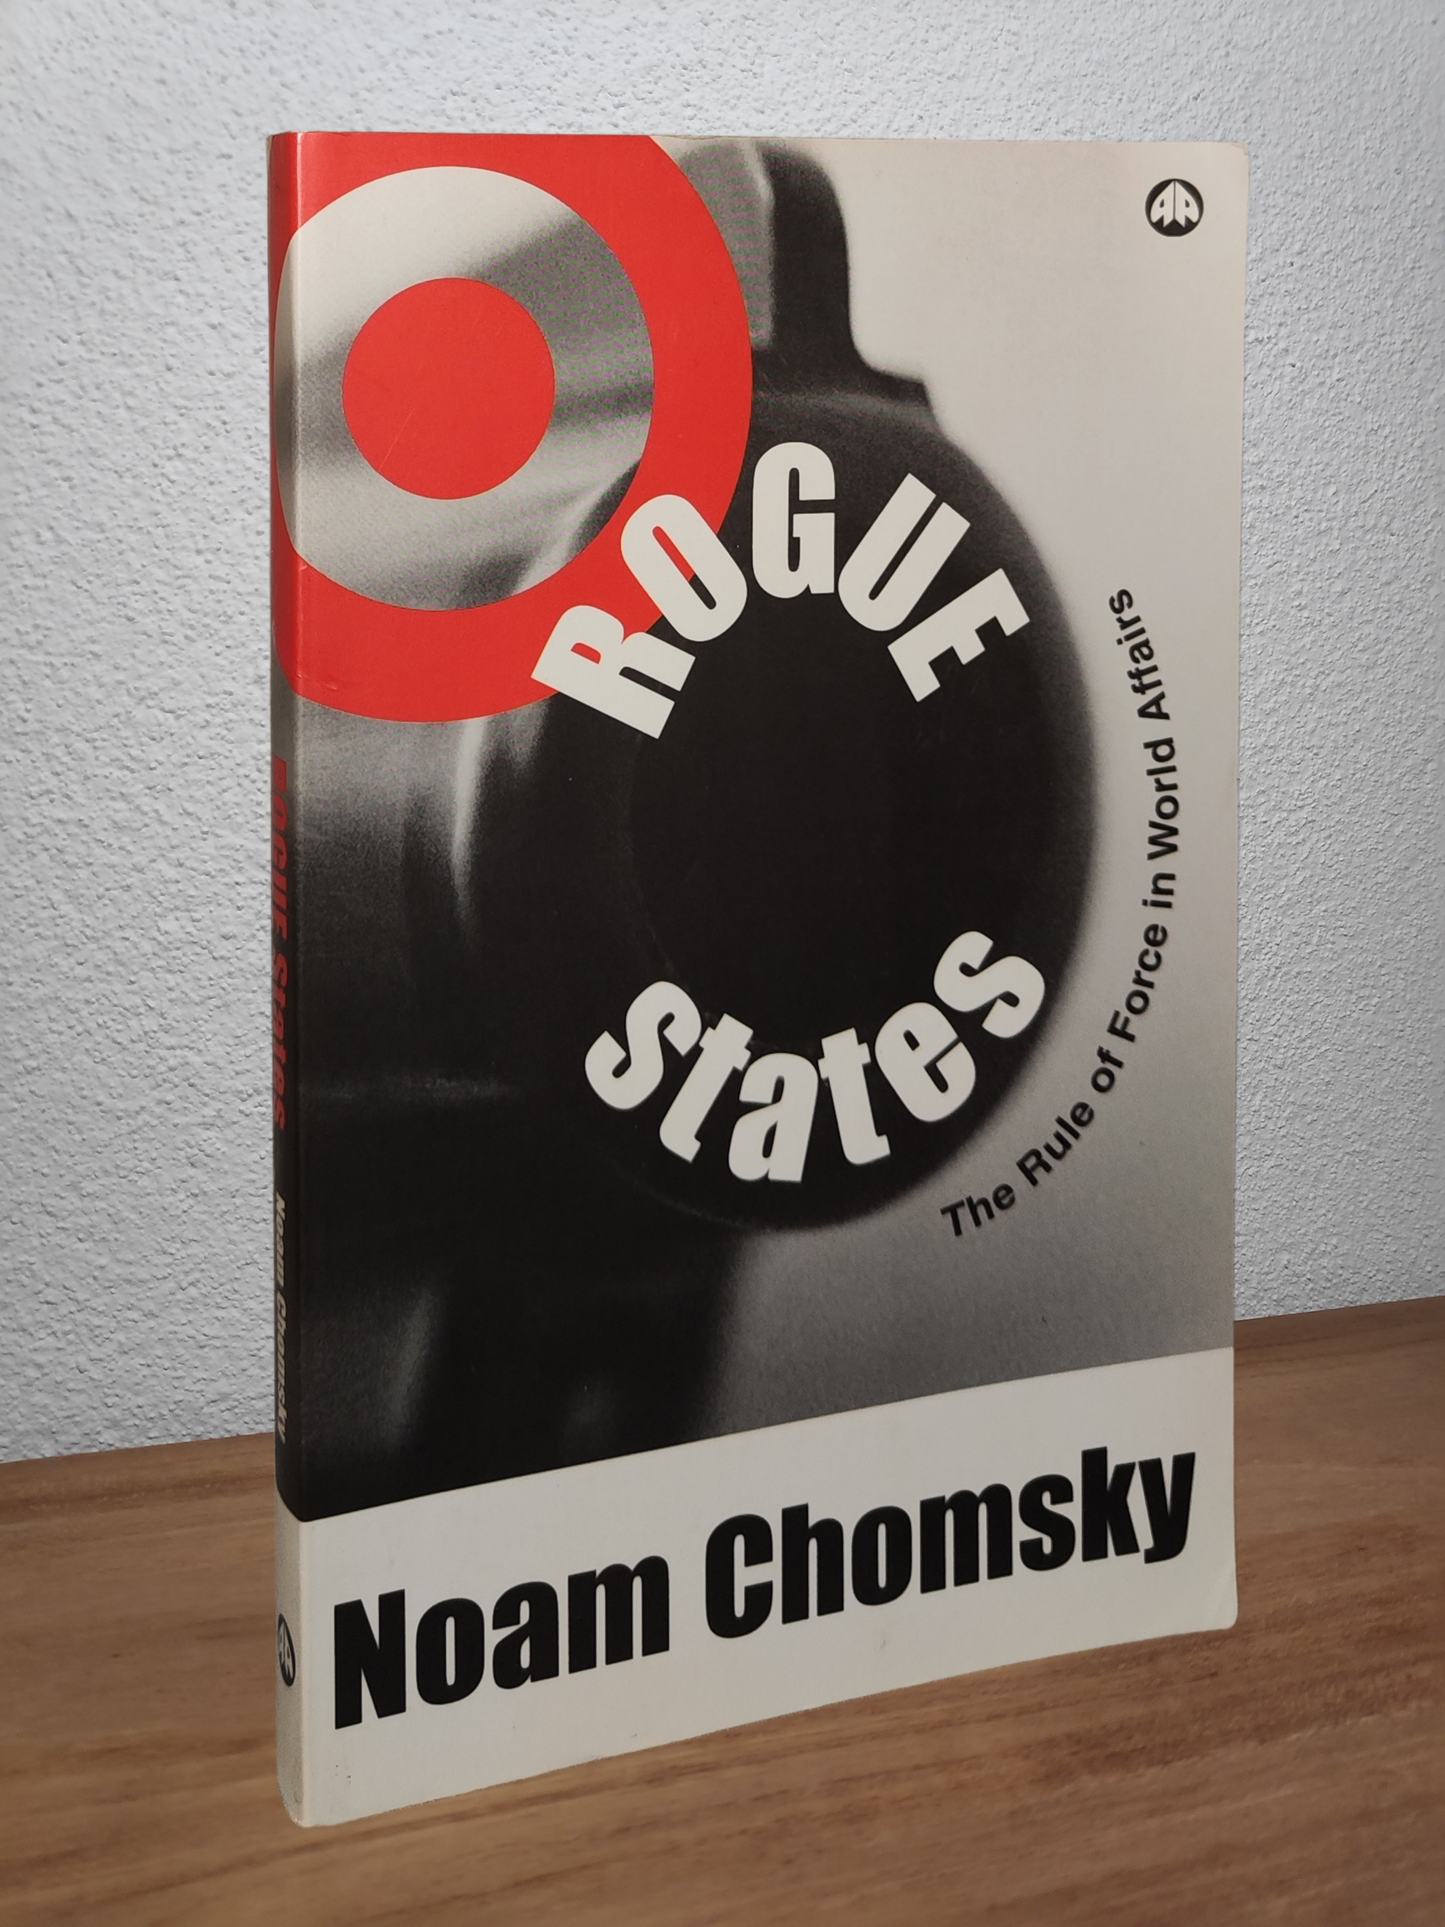 Noam Chomsky - Rogue States  - Second-hand english book to deliver in Zurich & Switzerland